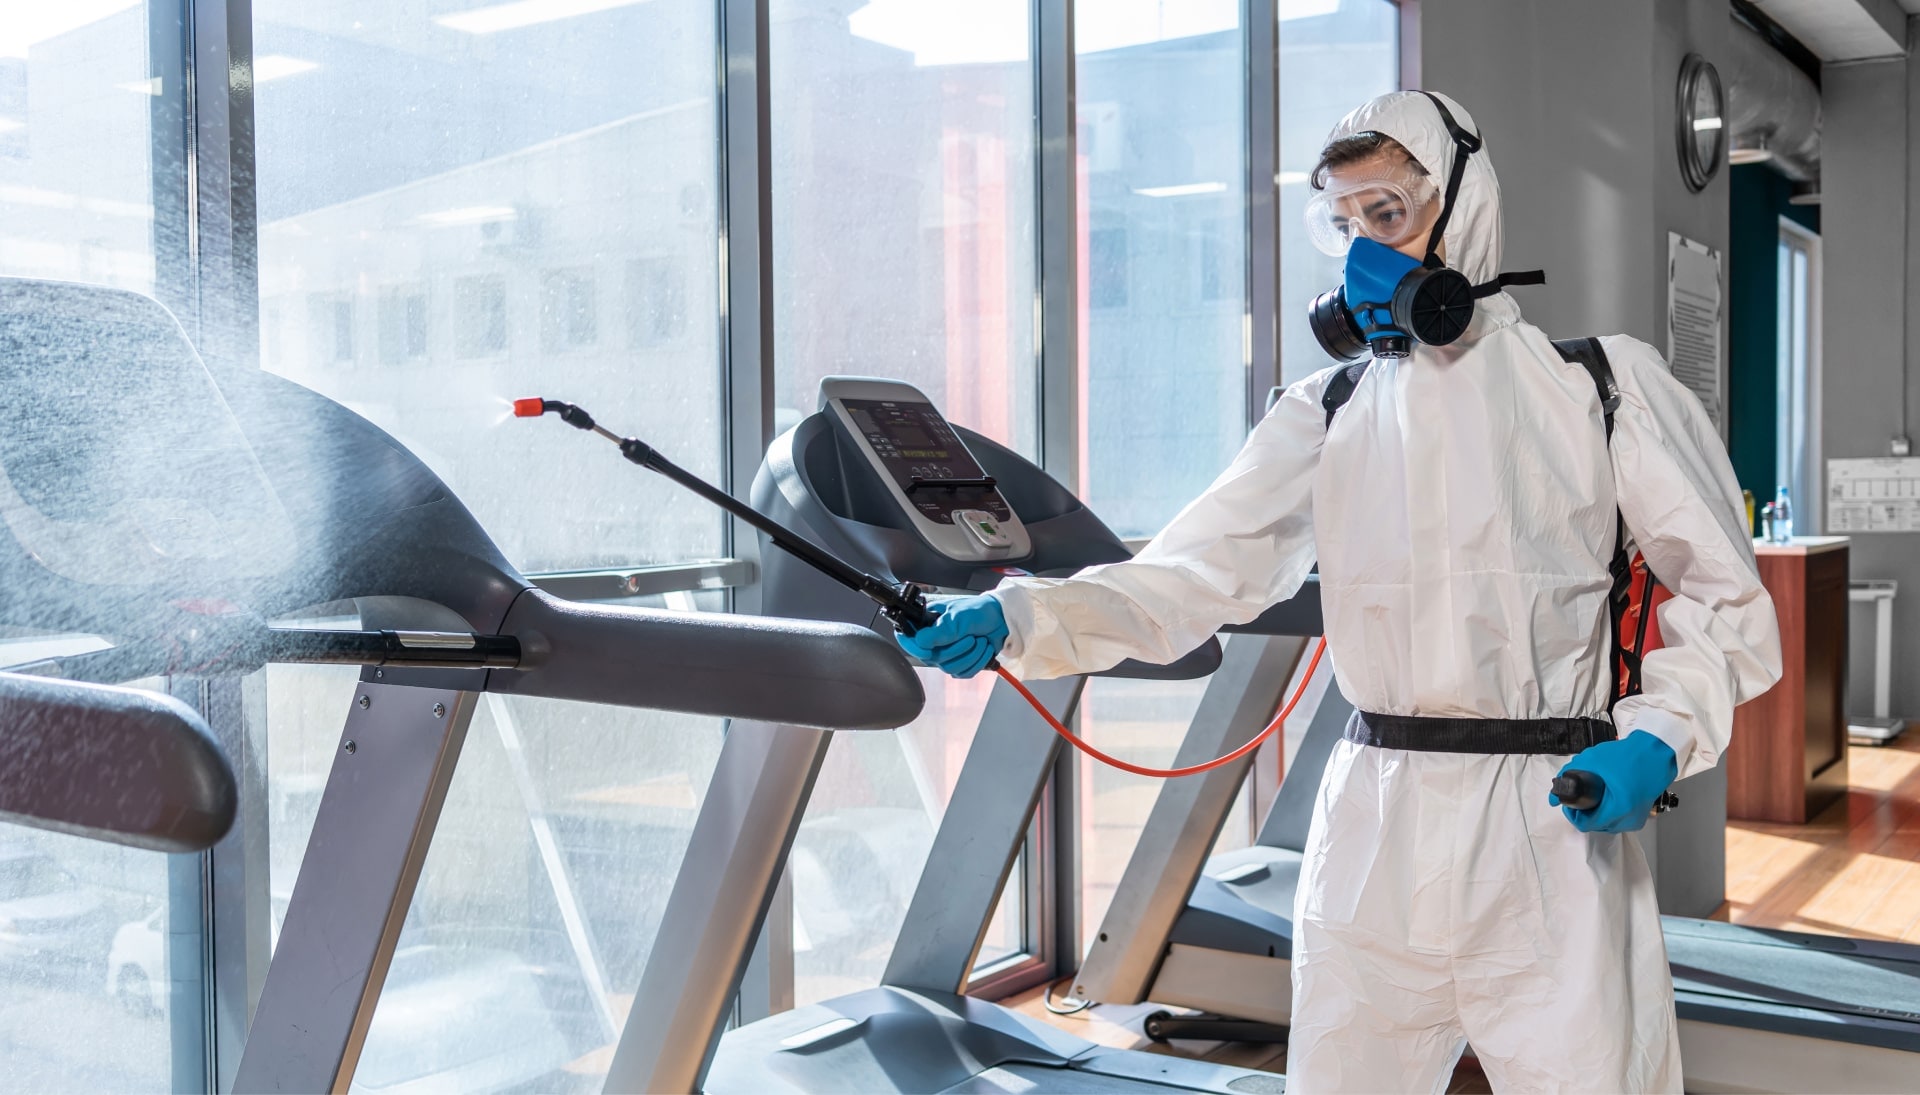 For commercial mold removal, we use the latest technology to identify and eliminate mold damage in Murfreesboro, Tennessee.